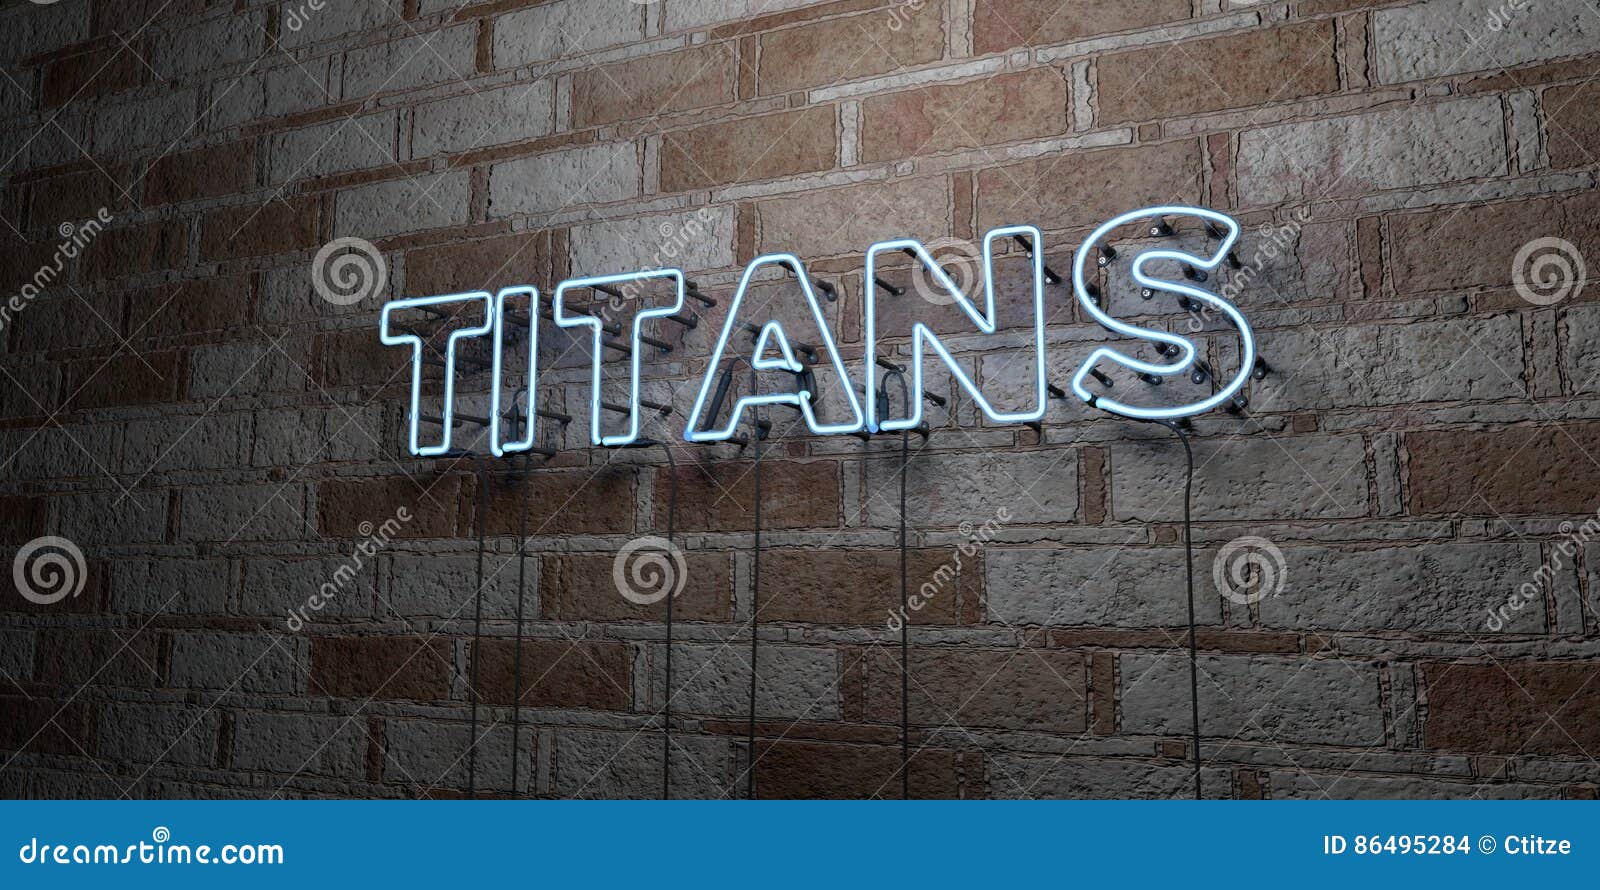 titans - glowing neon sign on stonework wall - 3d rendered royalty free stock 